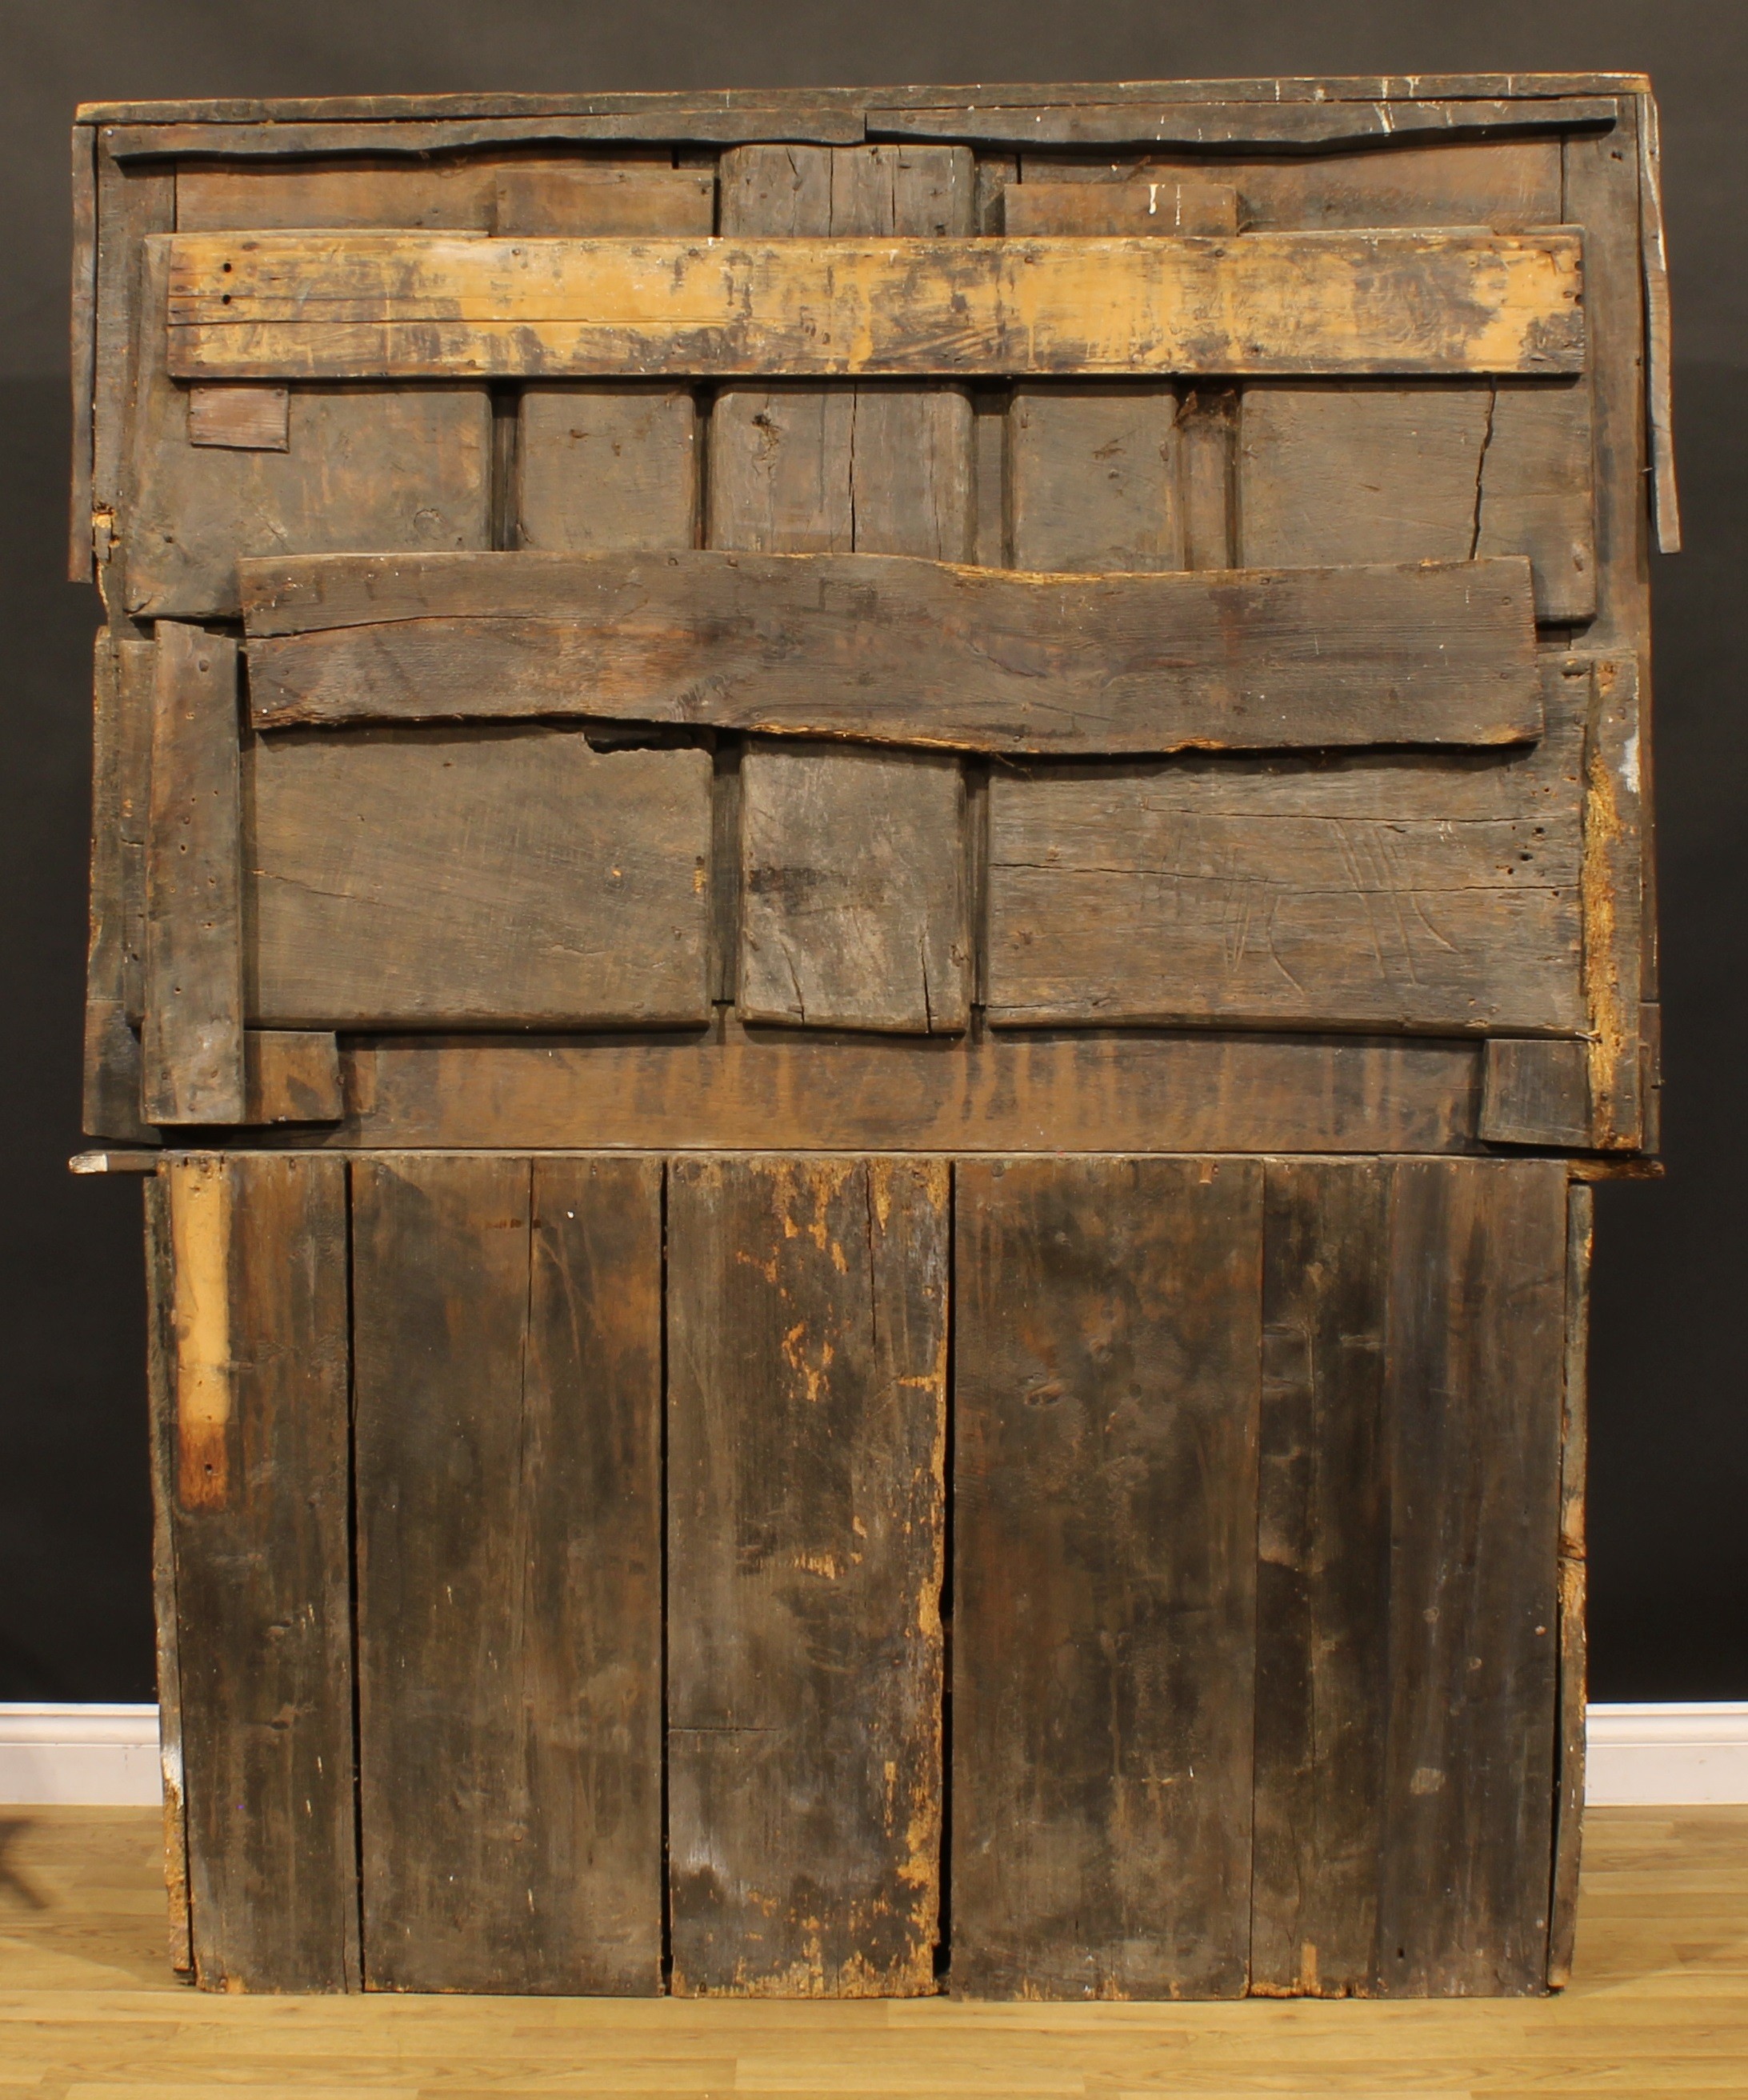 A 17th century style ecclesiastical Historicist Revival oak dresser or side cabinet, carved - Image 4 of 4